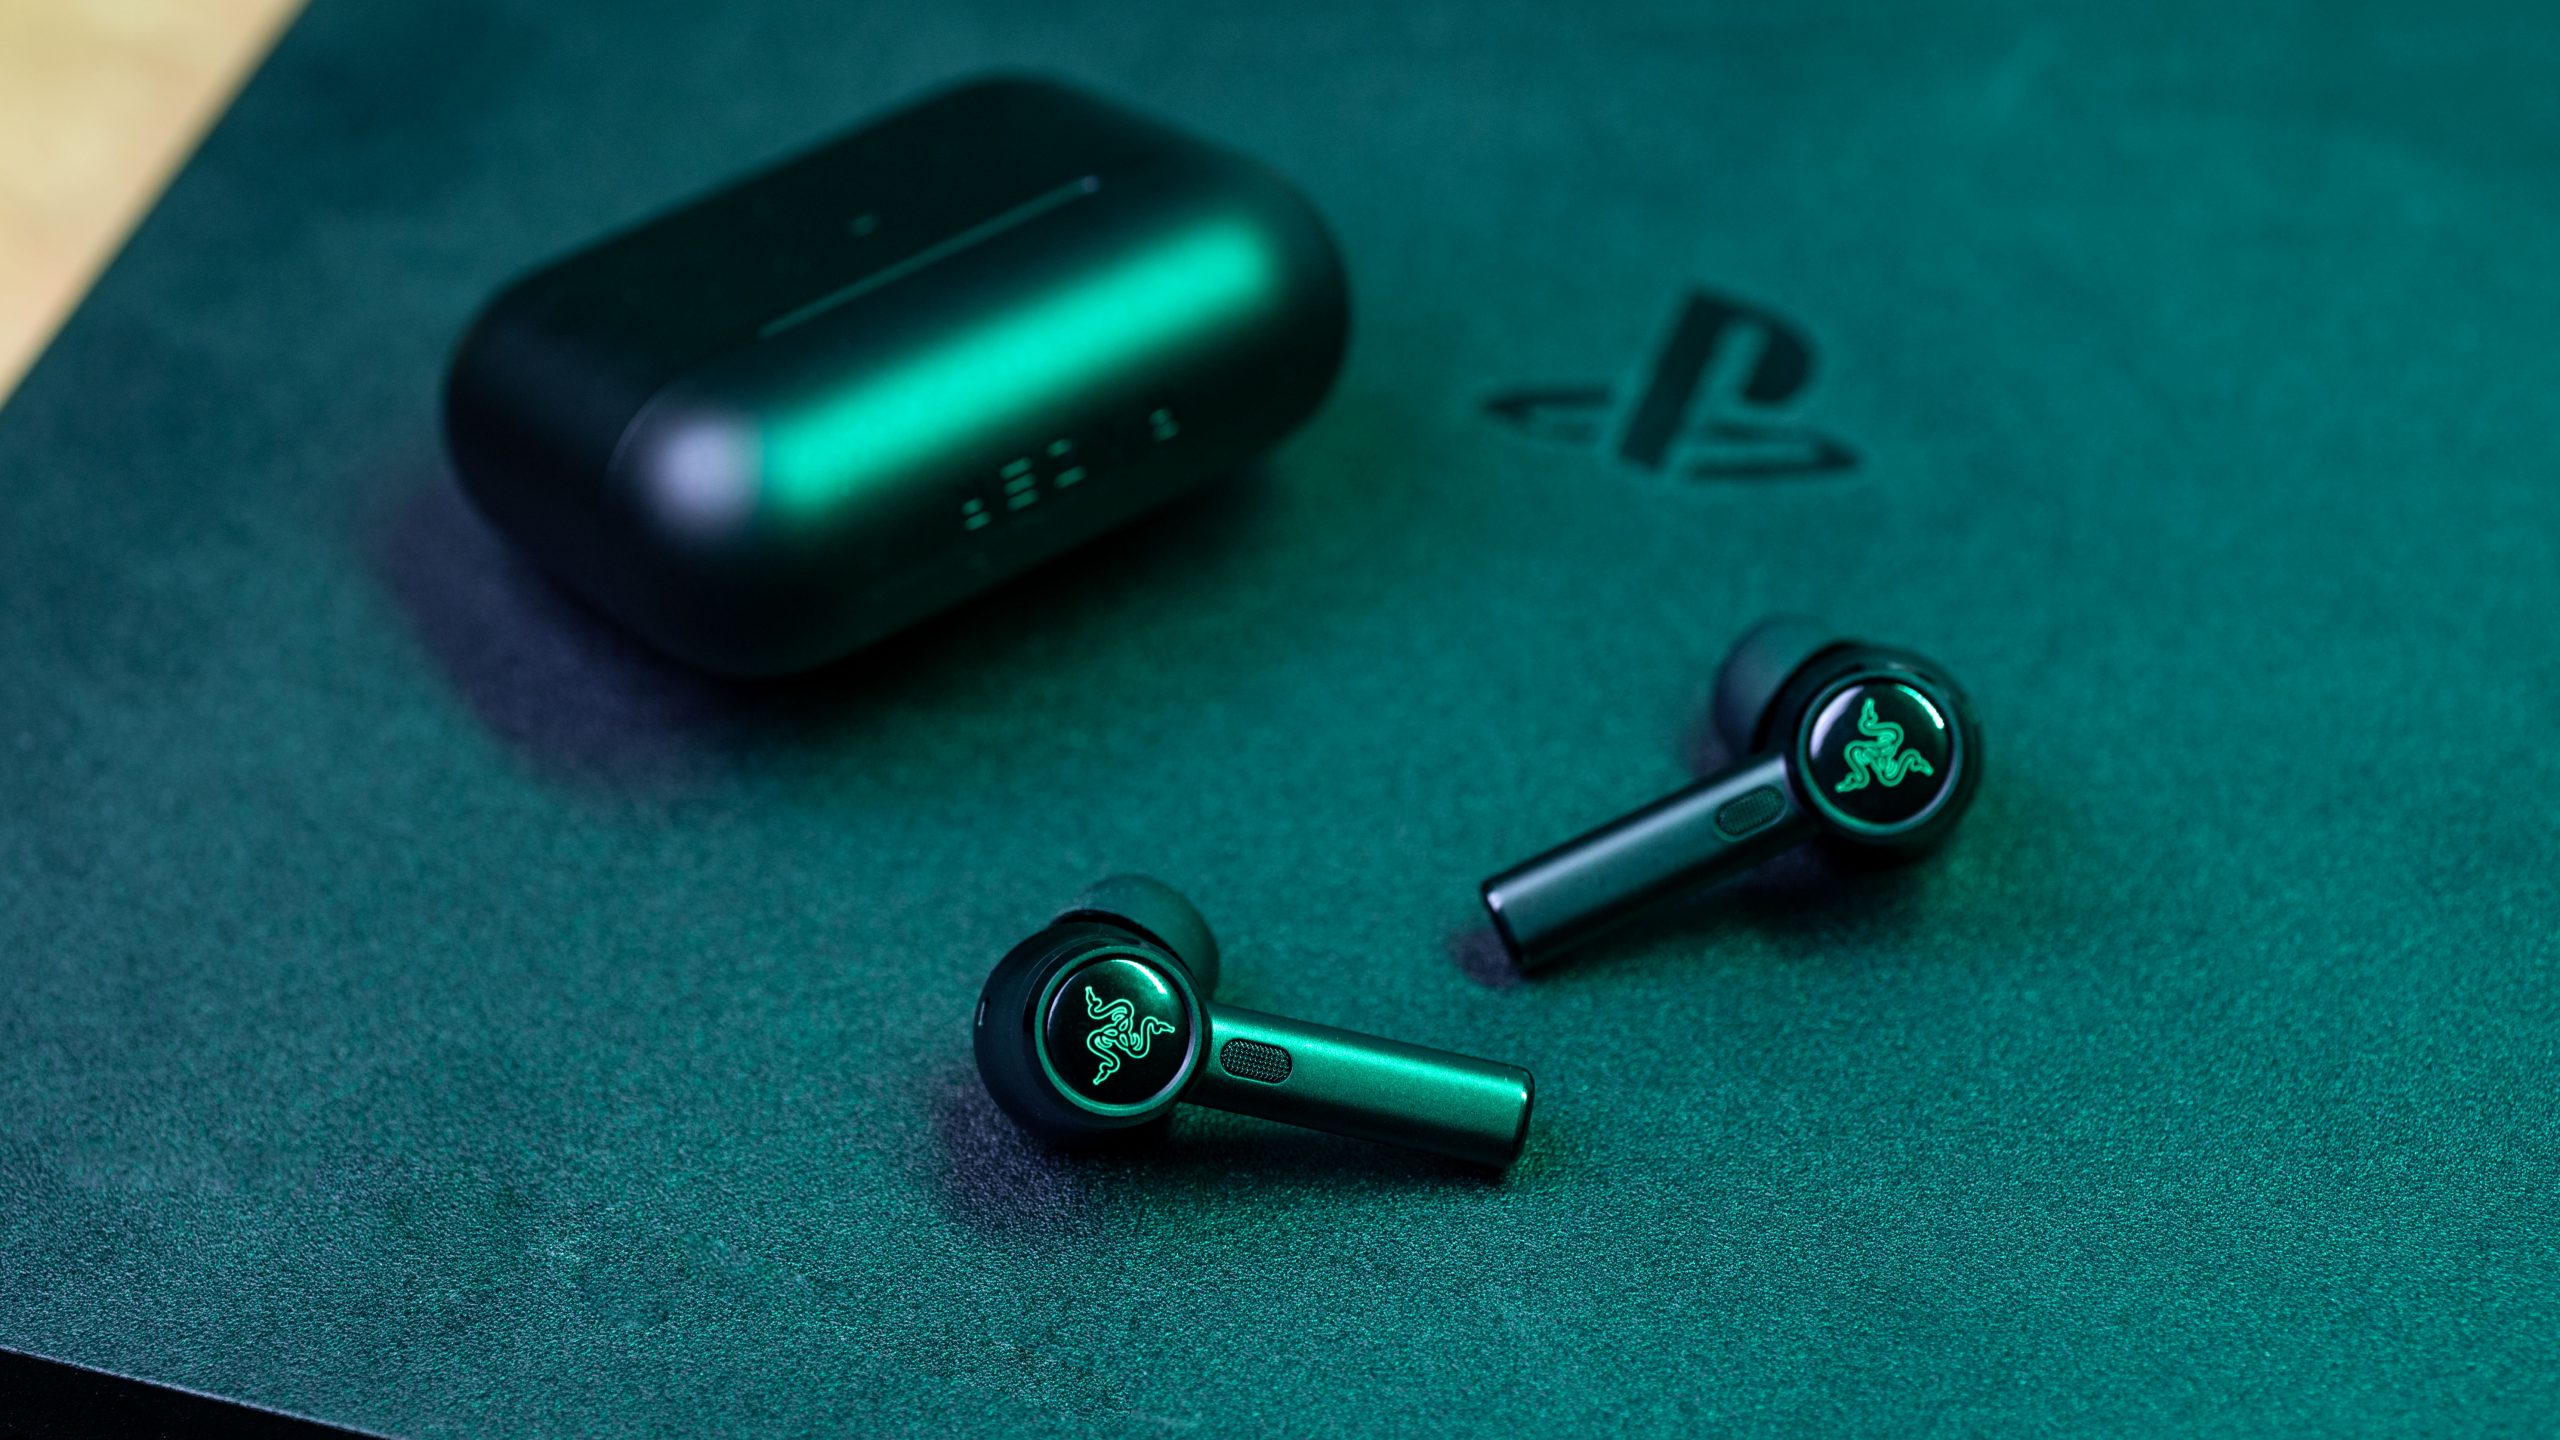 Razer Hammerhead True Wireless Bluetooth Gaming Earbuds: 60ms Low-Latency -  IPX4 Water Resistant - Bluetooth 5.0 Auto Pairing - Touch Enabled - 13mm